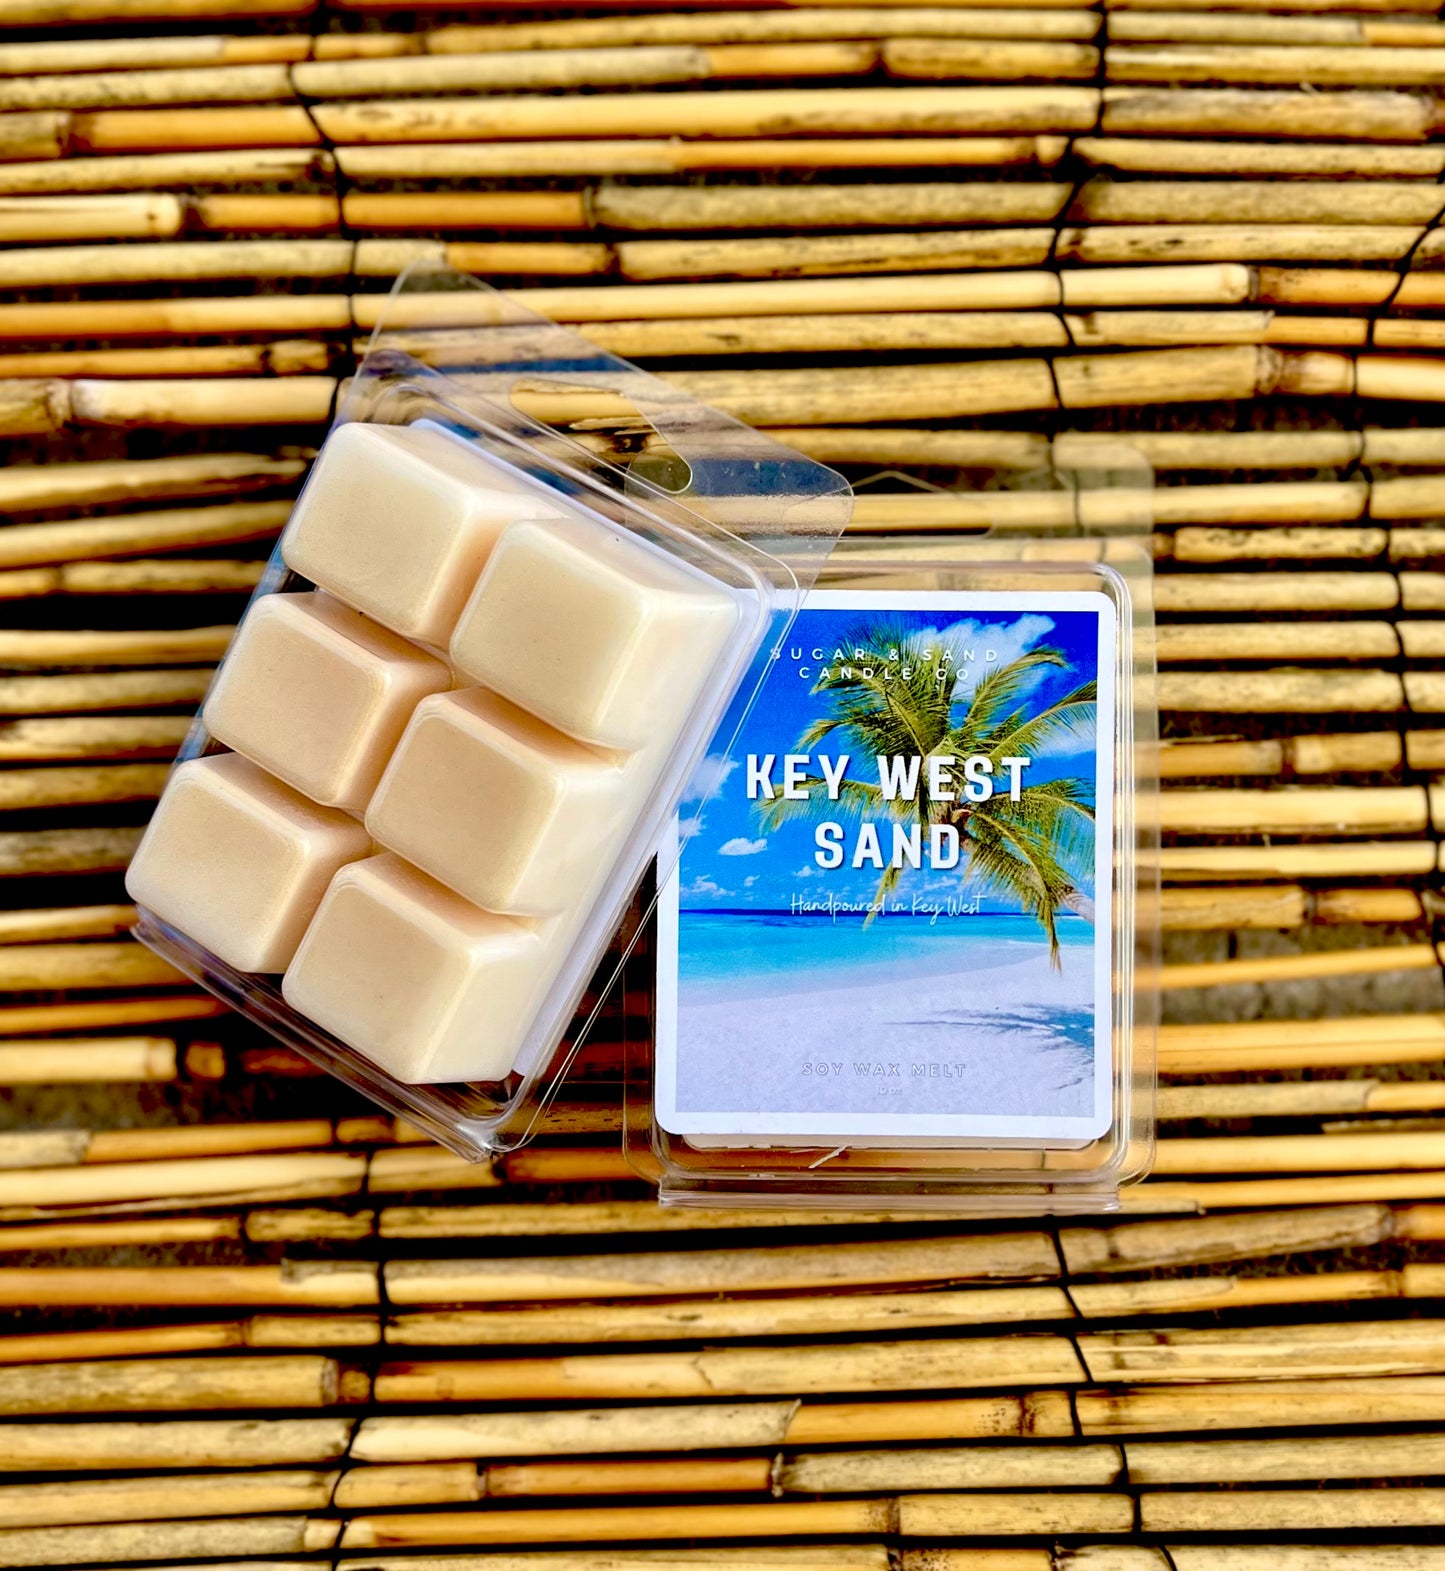 Wax Melts - Click for Scents